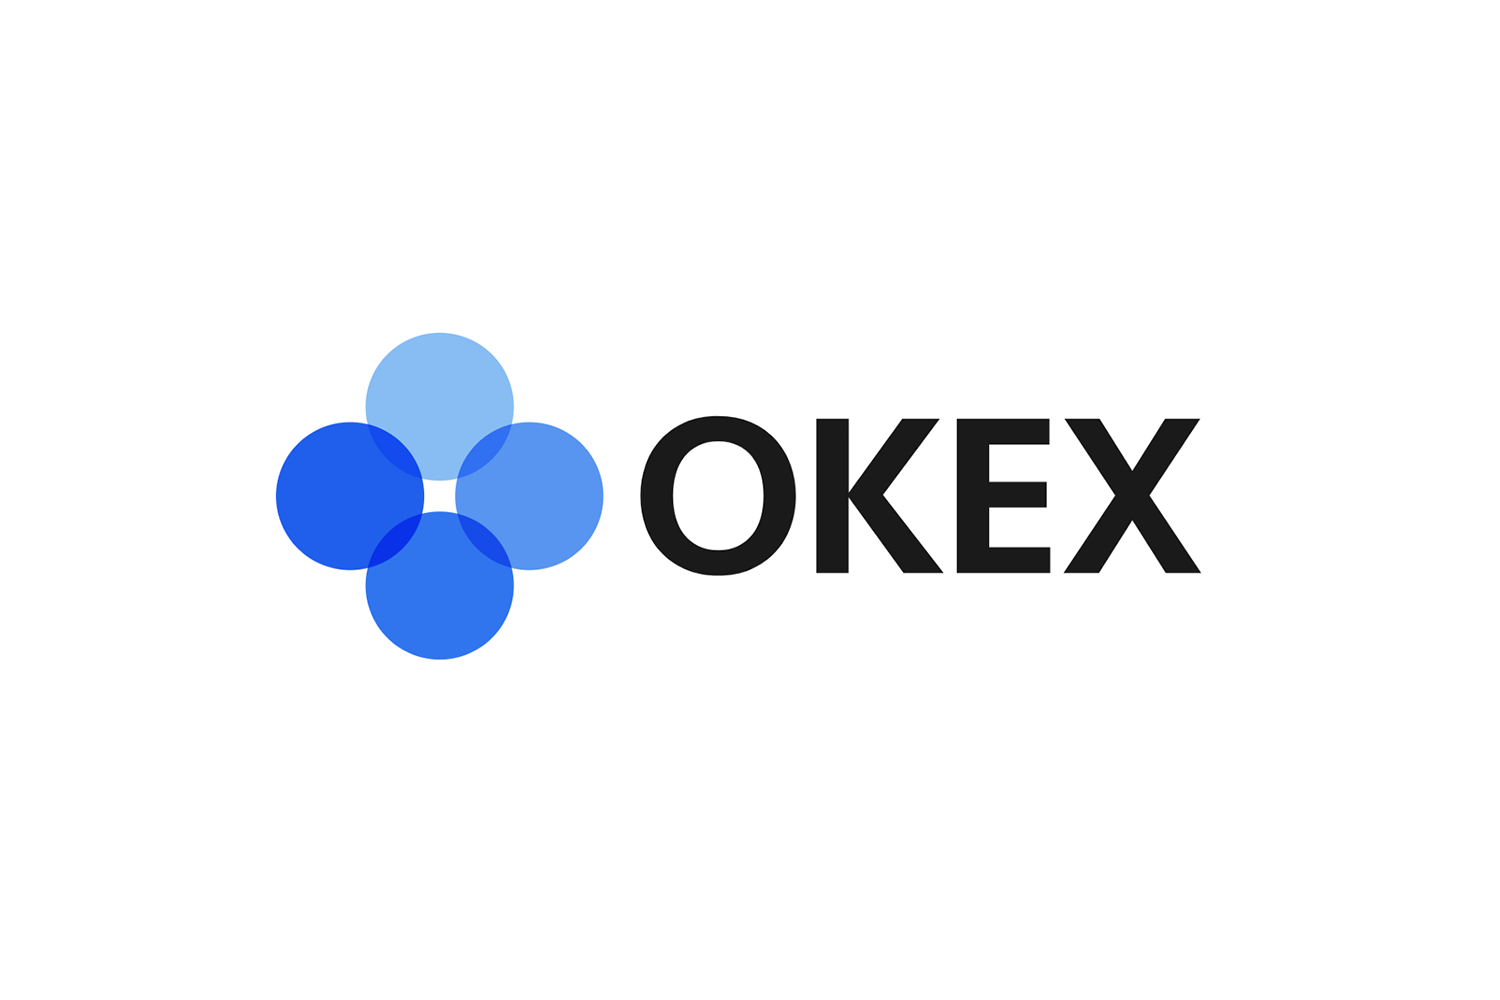 OKEx Expands Its Perpetual Swap Trading With 8 Contracts that Include BTC, ETH, LTC, XRP and More 13